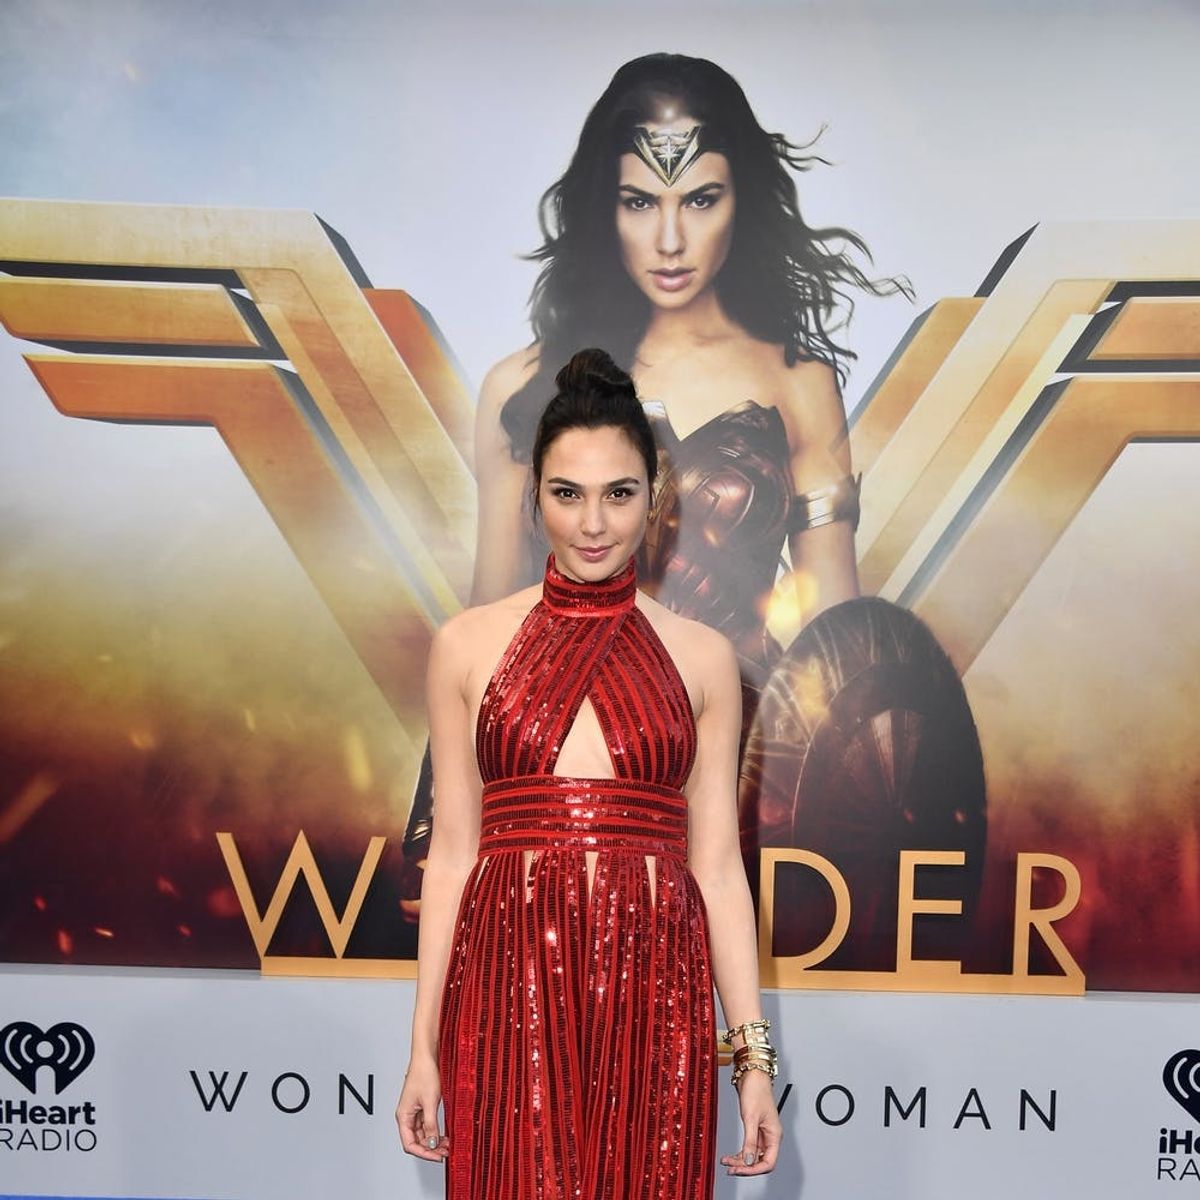 Gal Gadot Expertly Takes Down Body-Shamers Who Complained About Her “Wonder Woman” Casting